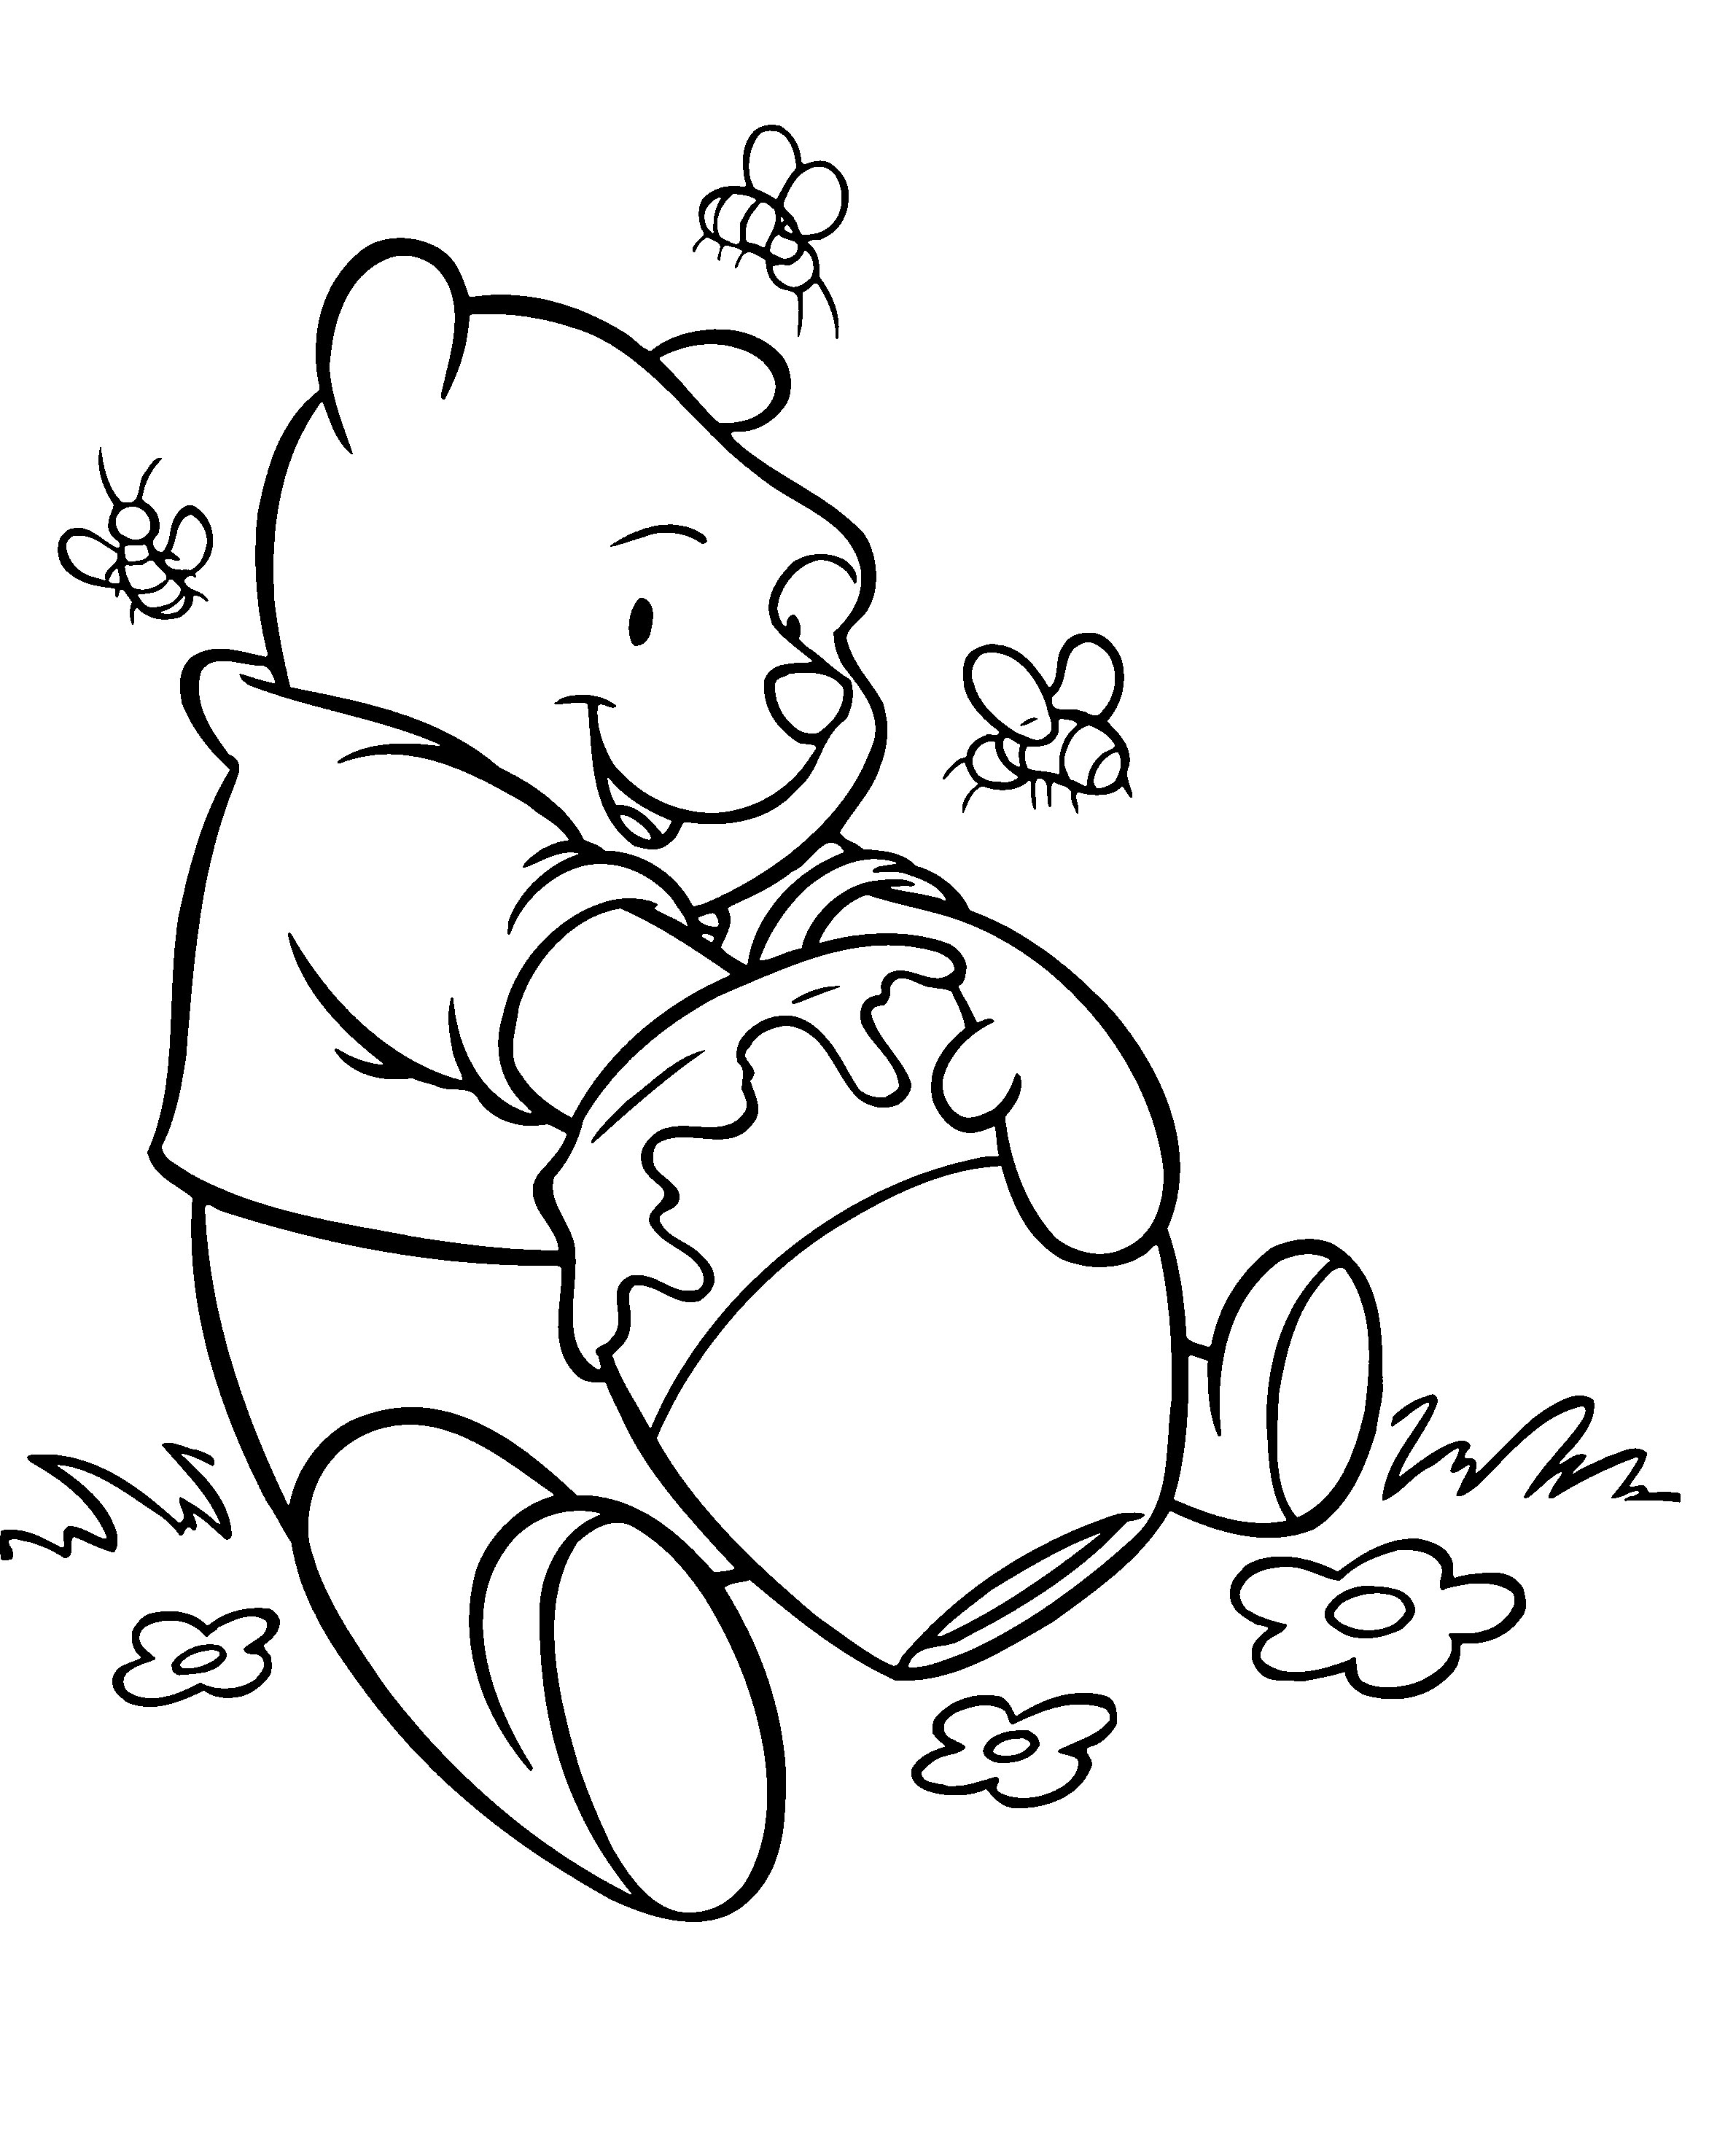 How To Draw Winnie The Pooh Winnie The Pooh Drawing C - vrogue.co